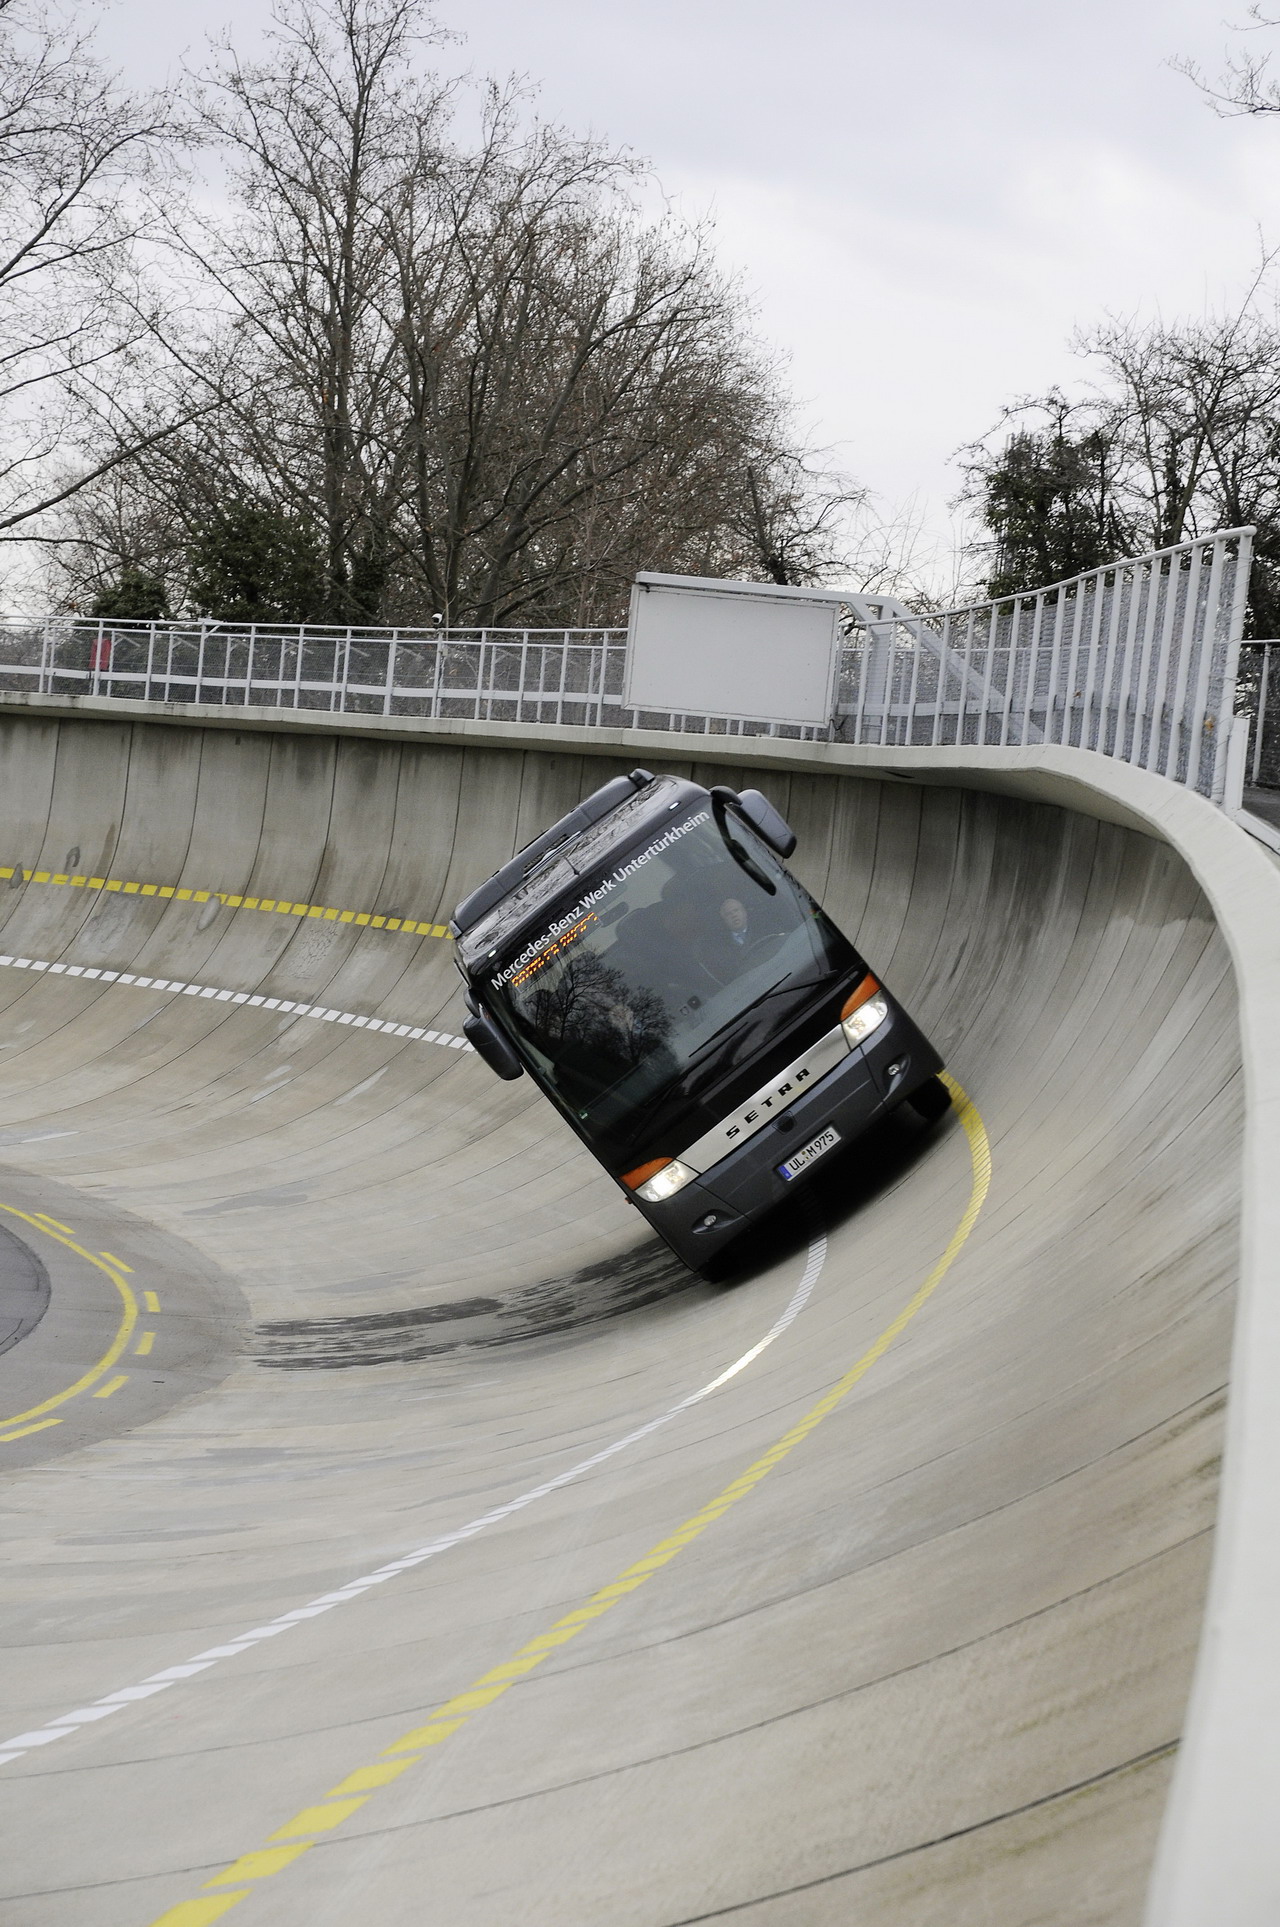 setra-s-411-hd-as-a-visitor-bus-at-the-daimler-ag-test-track_2 ...